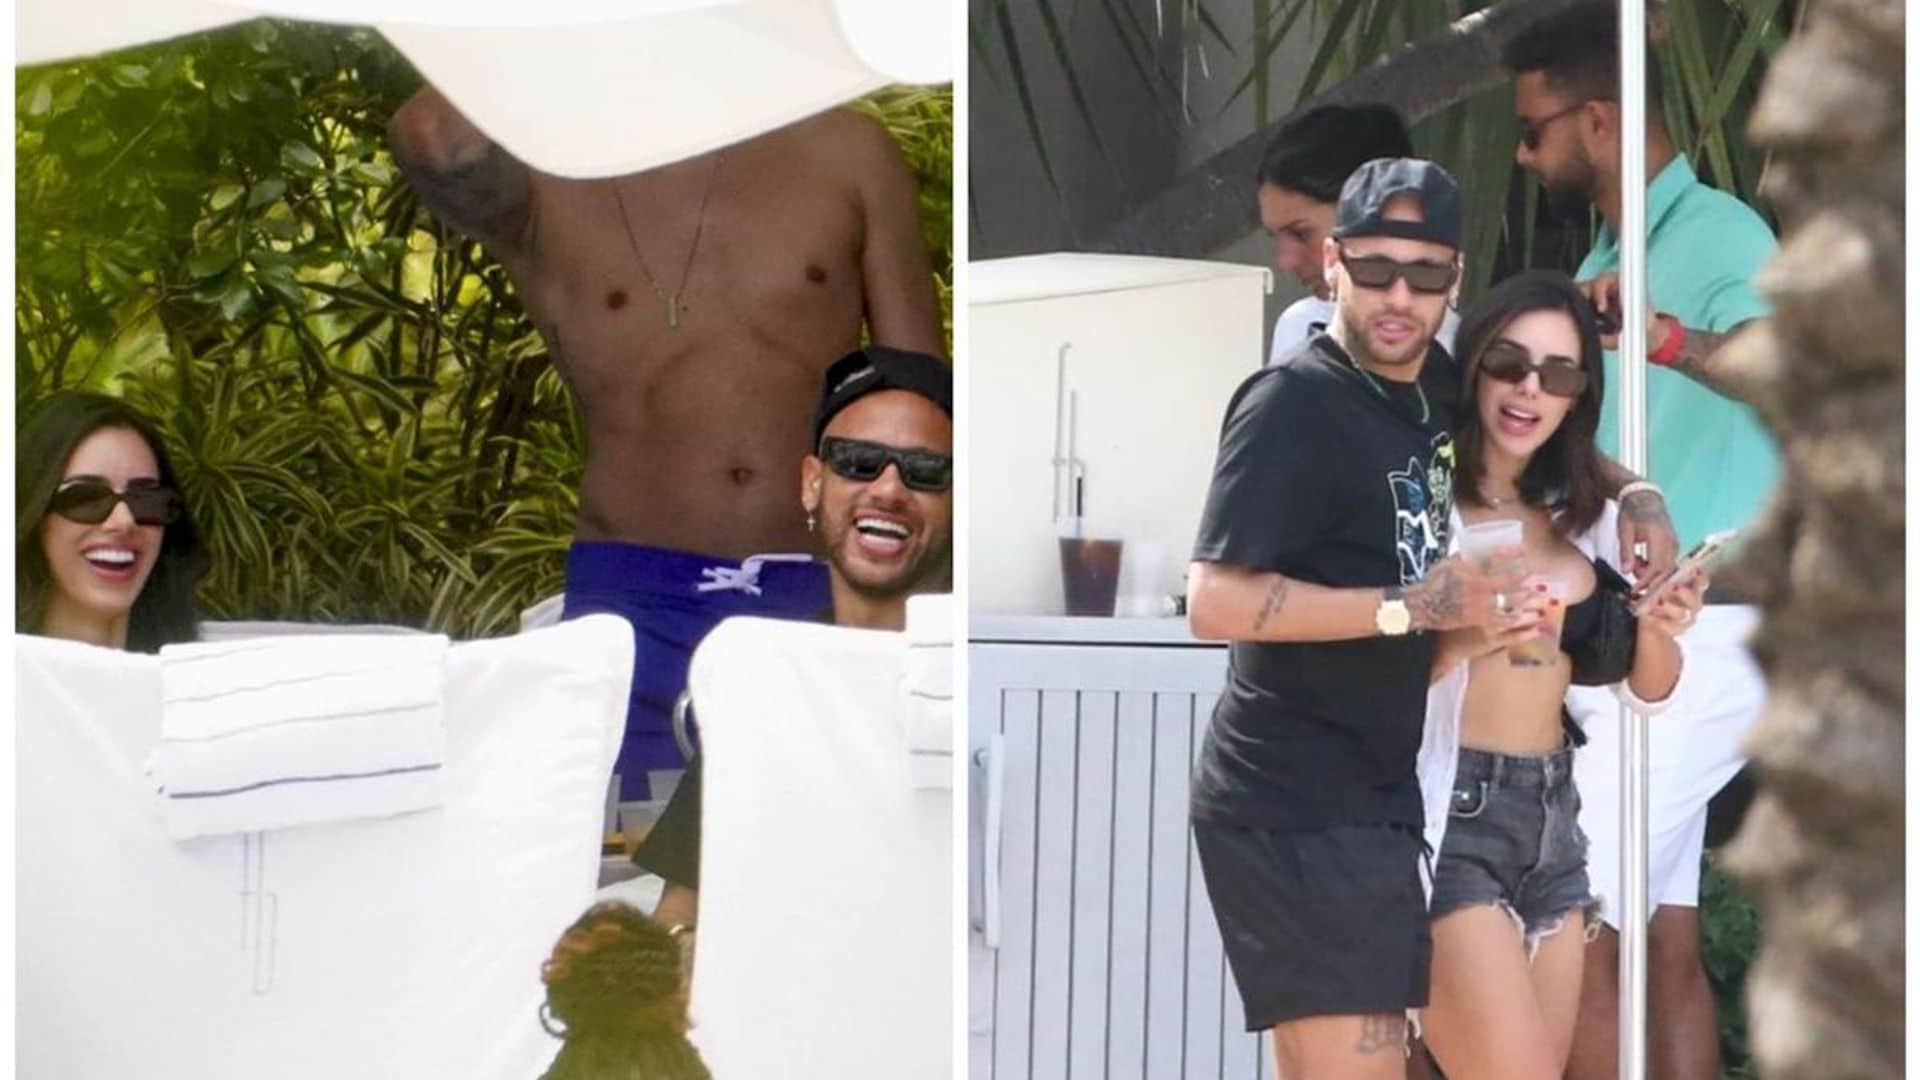 Neymar and his girlfriend Bruna Biancardi cuddle up at a pool party